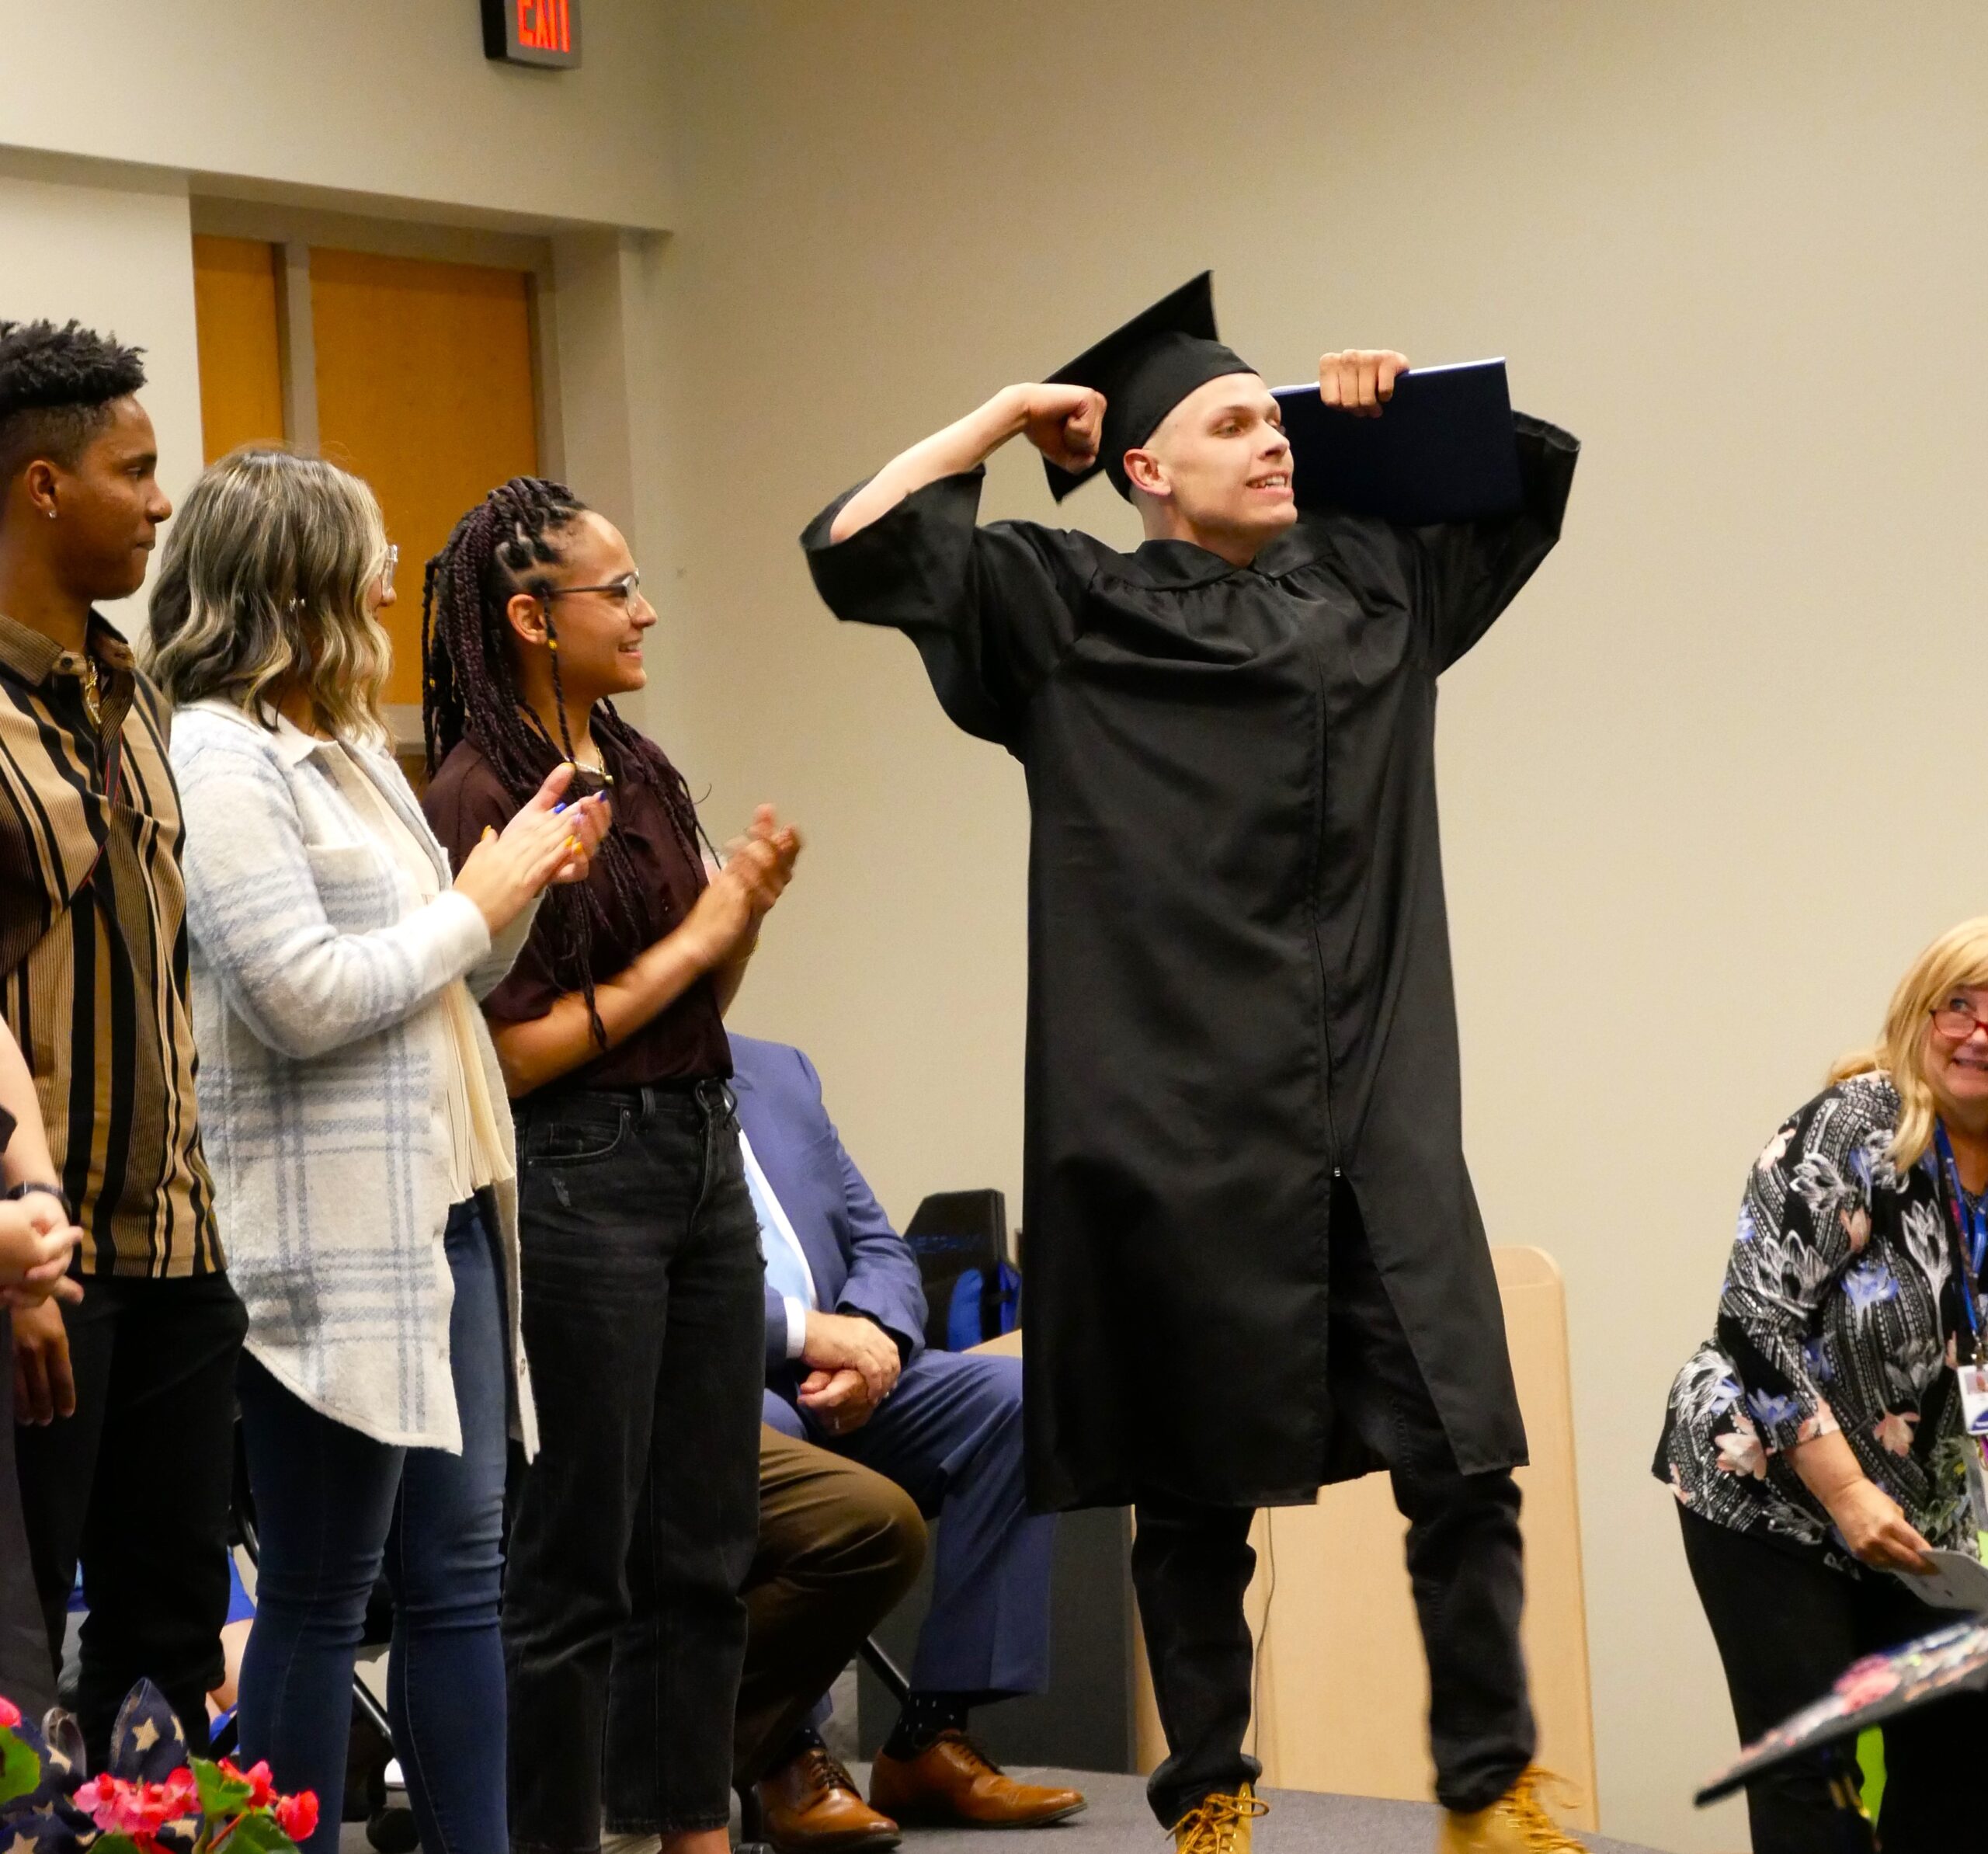 MCCTC man excited at graduation